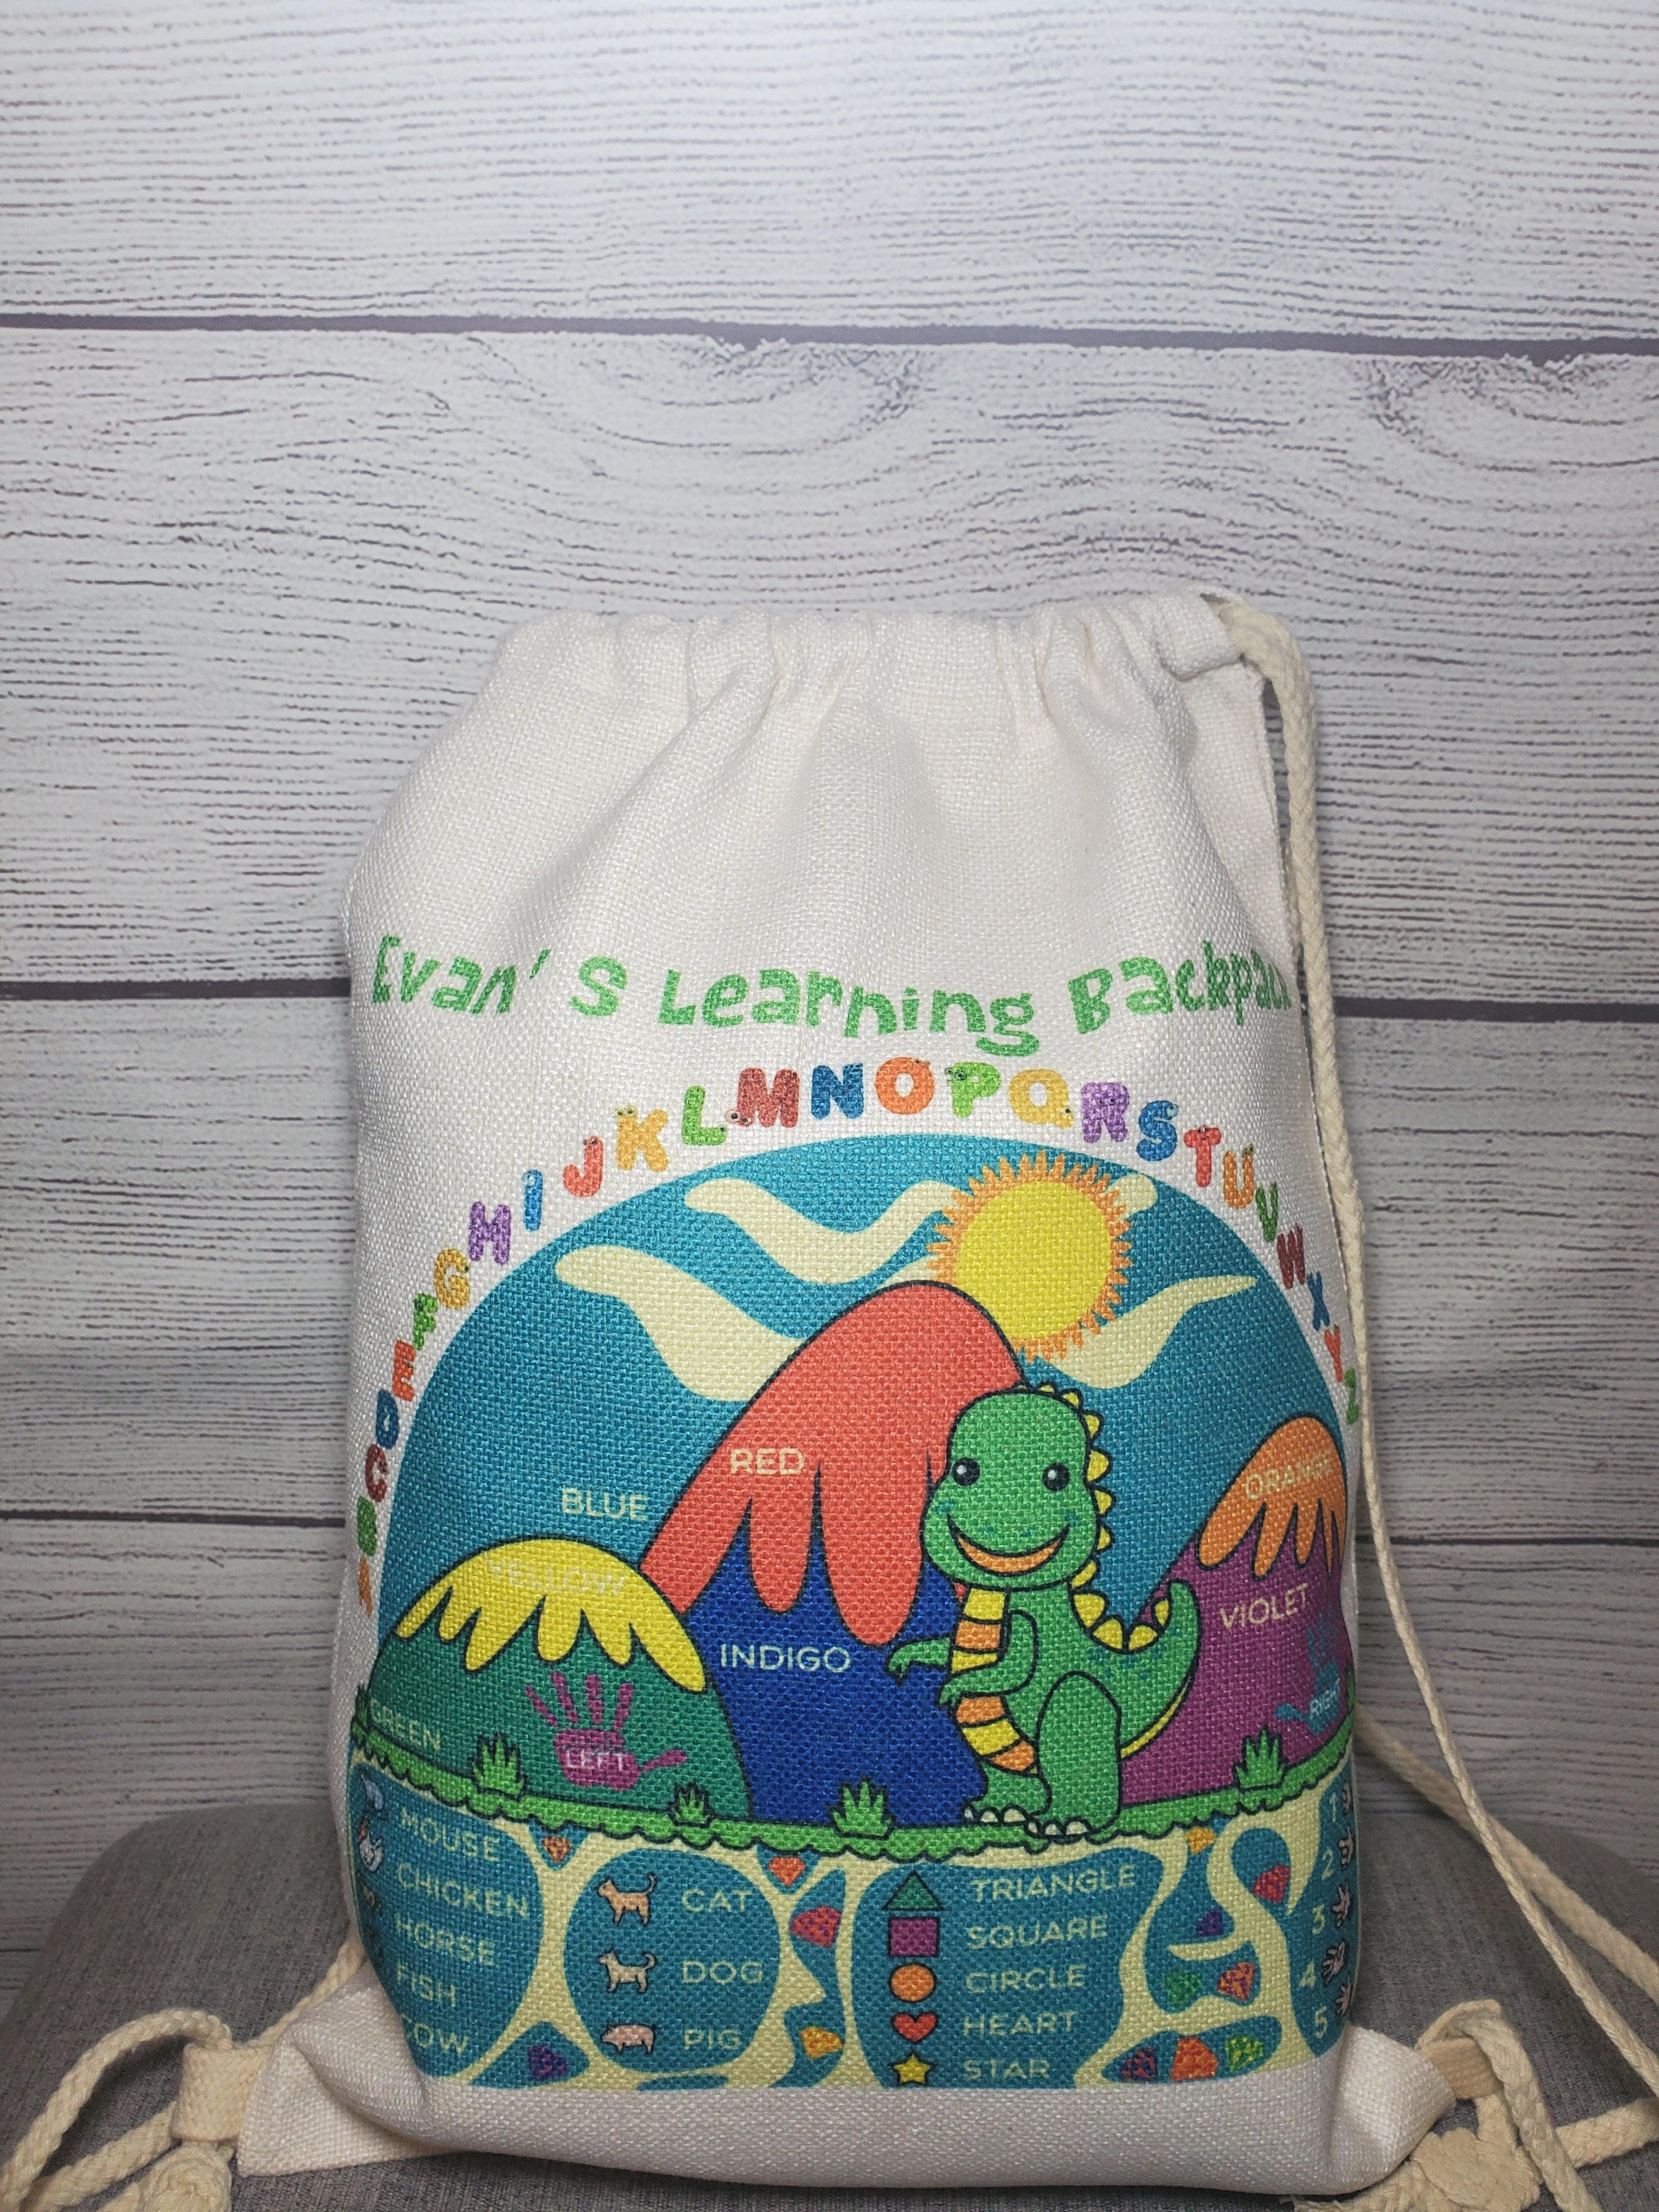 Dinosaur Bag Gift for Kids, Personalized Party Favor Backpack , Gift for Dino Lovers, Purse , Drawstring, Backpack Or Tote Grift and Shoes Gymnastics bag, Ballerina Birthday Gift for Girls, Unicorn Sports Bags, Unicorn backpack, Back to School , Unicorn pillow case personalized Sequin Throw Pillowcase Custom Reversible Pillow Decorative Cushion Pillow Cover unicorn lover gift | Gift for child with Sensory Need | Gift for 5 year old | Gift for Girls | Gift for 2 3 4 5 6 year old girls, Gym Bags